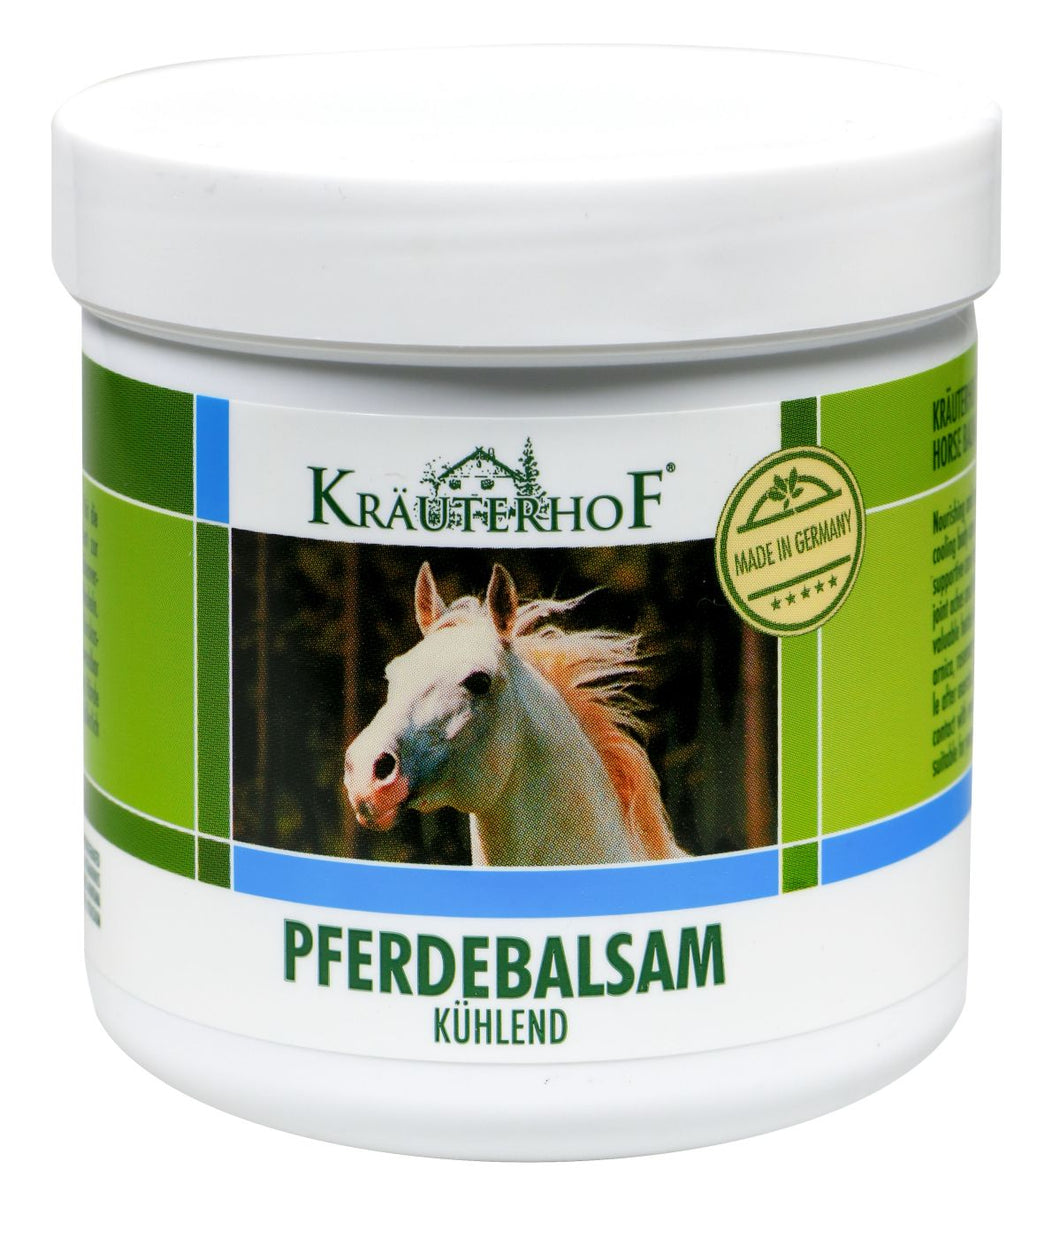 Kräuterhof Horse Balm 250 ml The balm contains herbal extracts from horse chestnuts.